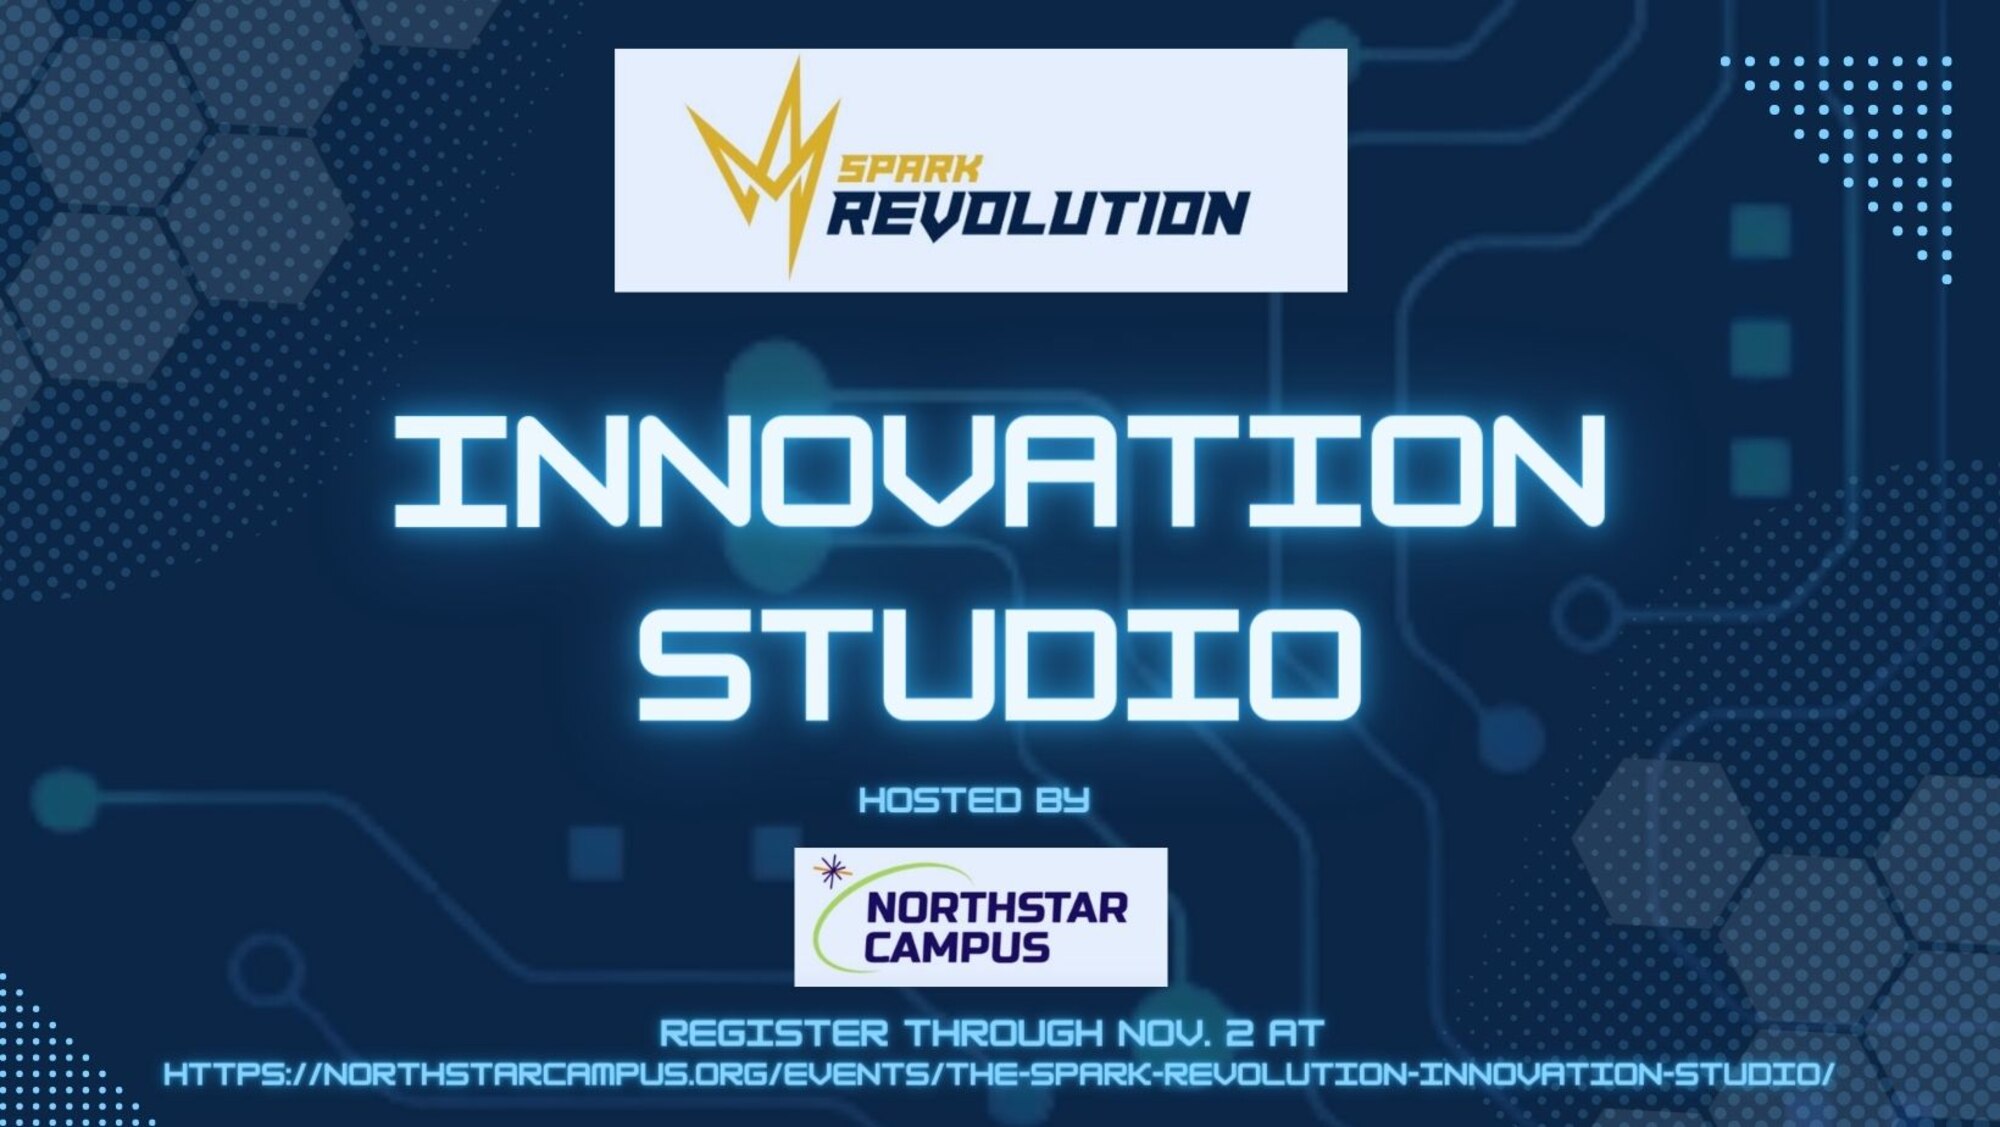 Neon sign letting, technology-based background, navy blue and light blue, innovation studio, sign up link